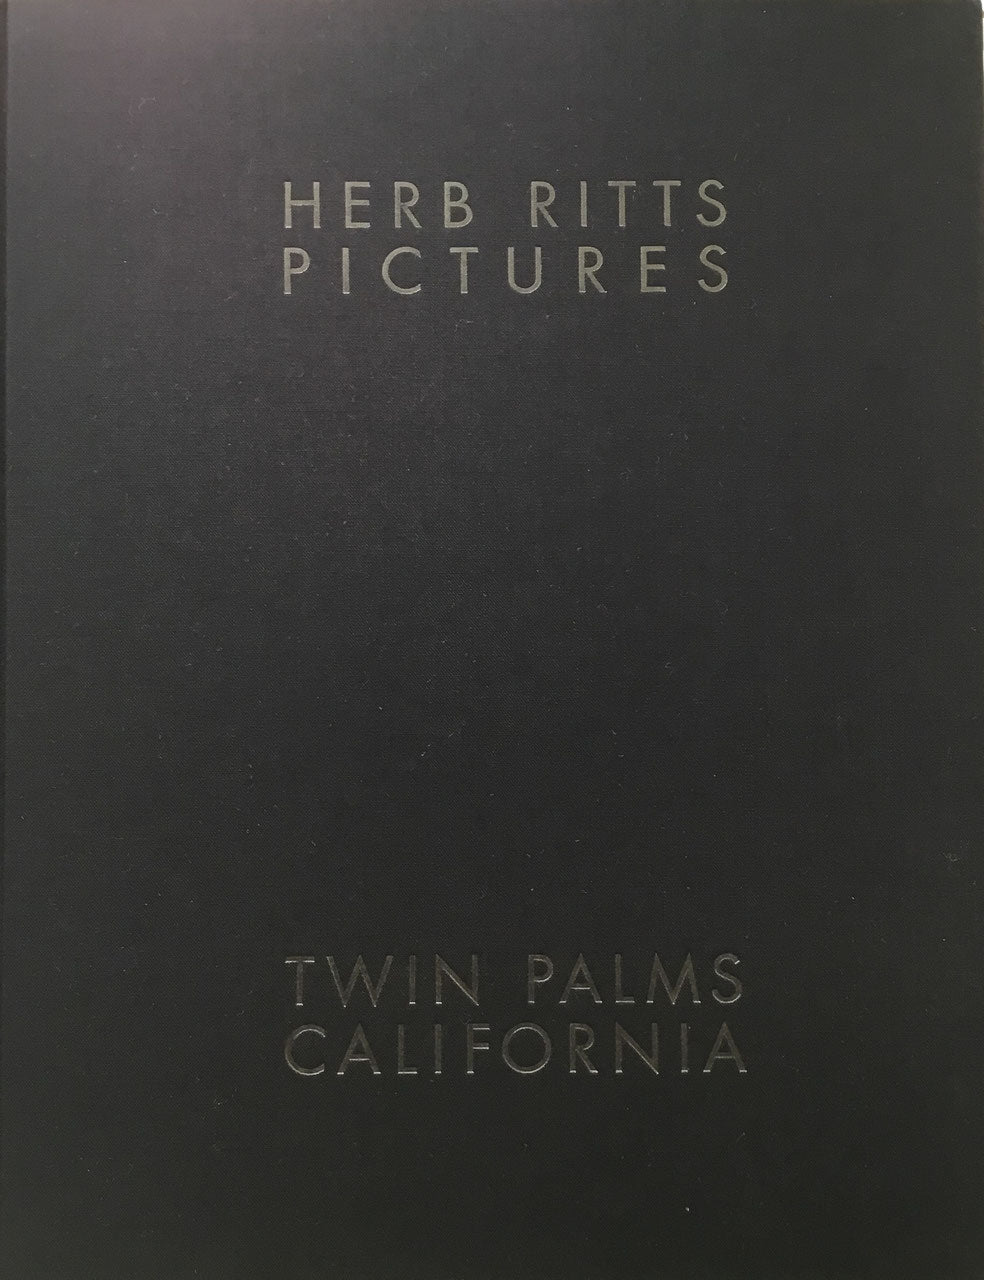 Herb Ritts PICTURES ハーブ・リッツ写真集 – smokebooks shop